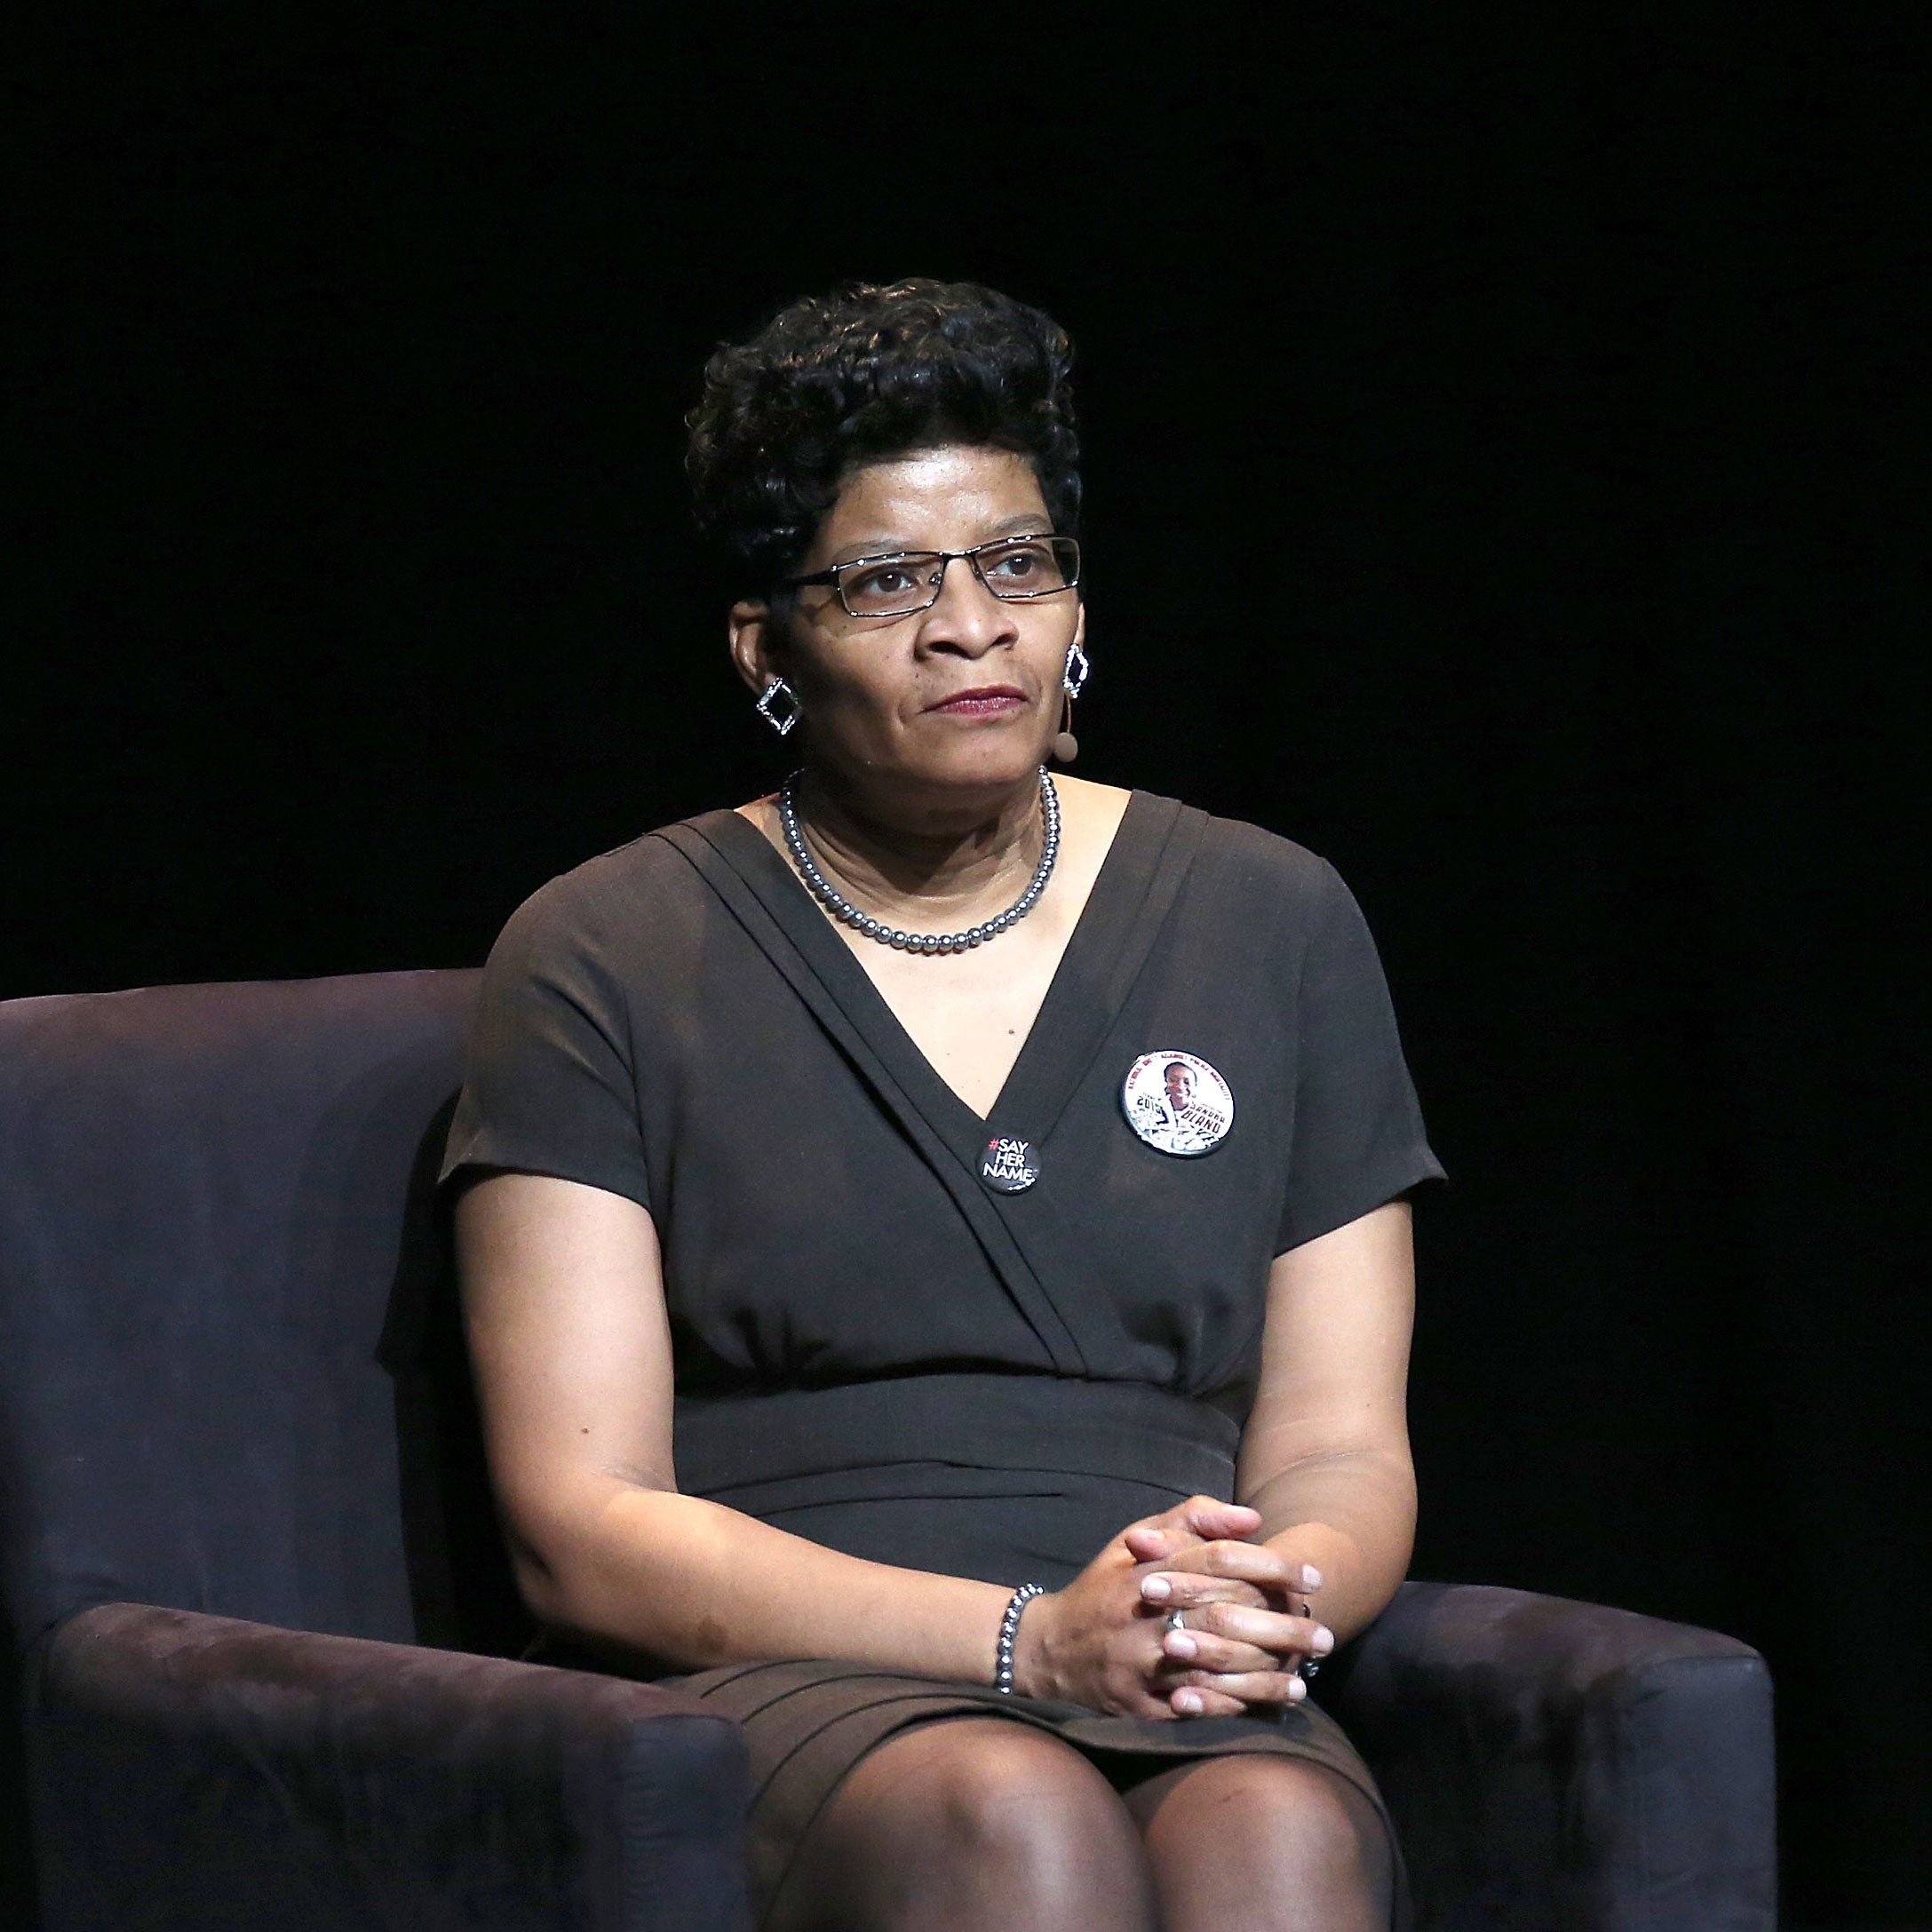 Sandra Bland's Mother Urges Activists To 'Wake Up, Get Up, Step Up, Or Shut Up'
